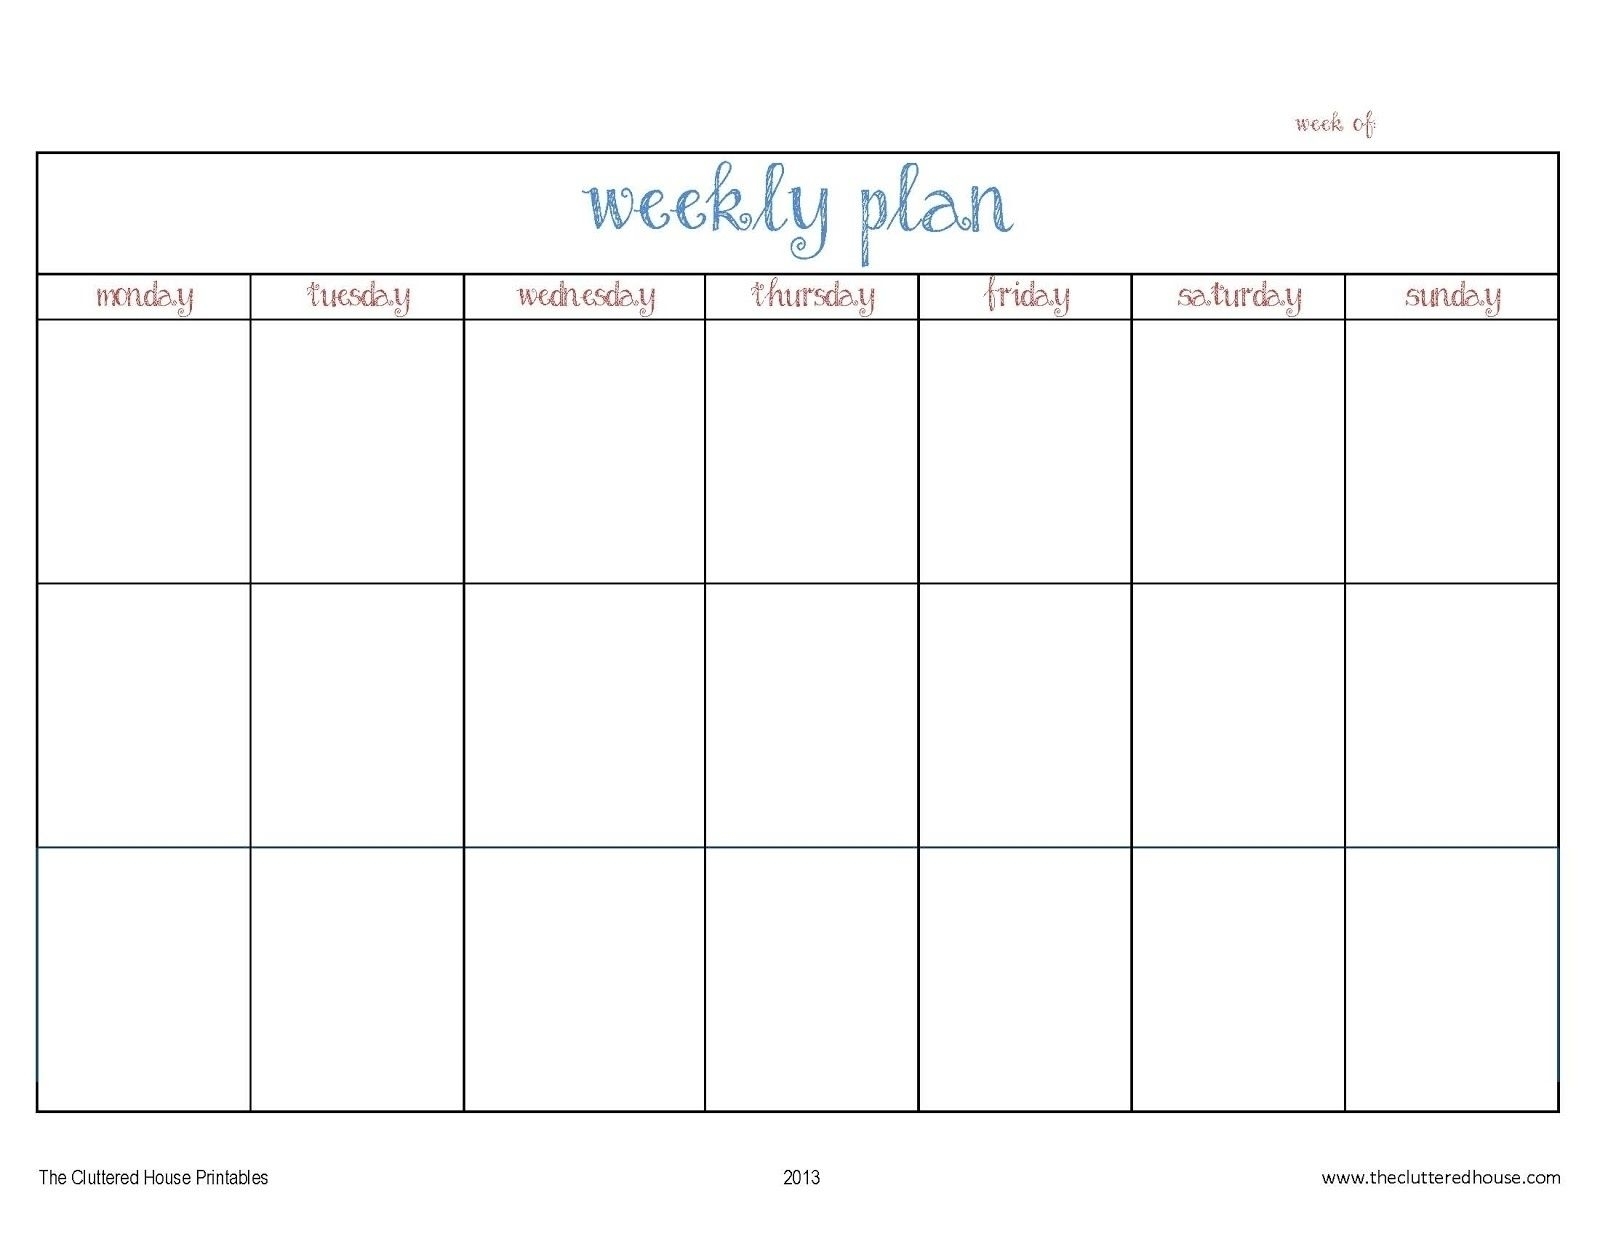 Free Table Calendar Pdf Weekly With Times Templates | Smorad in Weekly Calandar Template Starting Monday